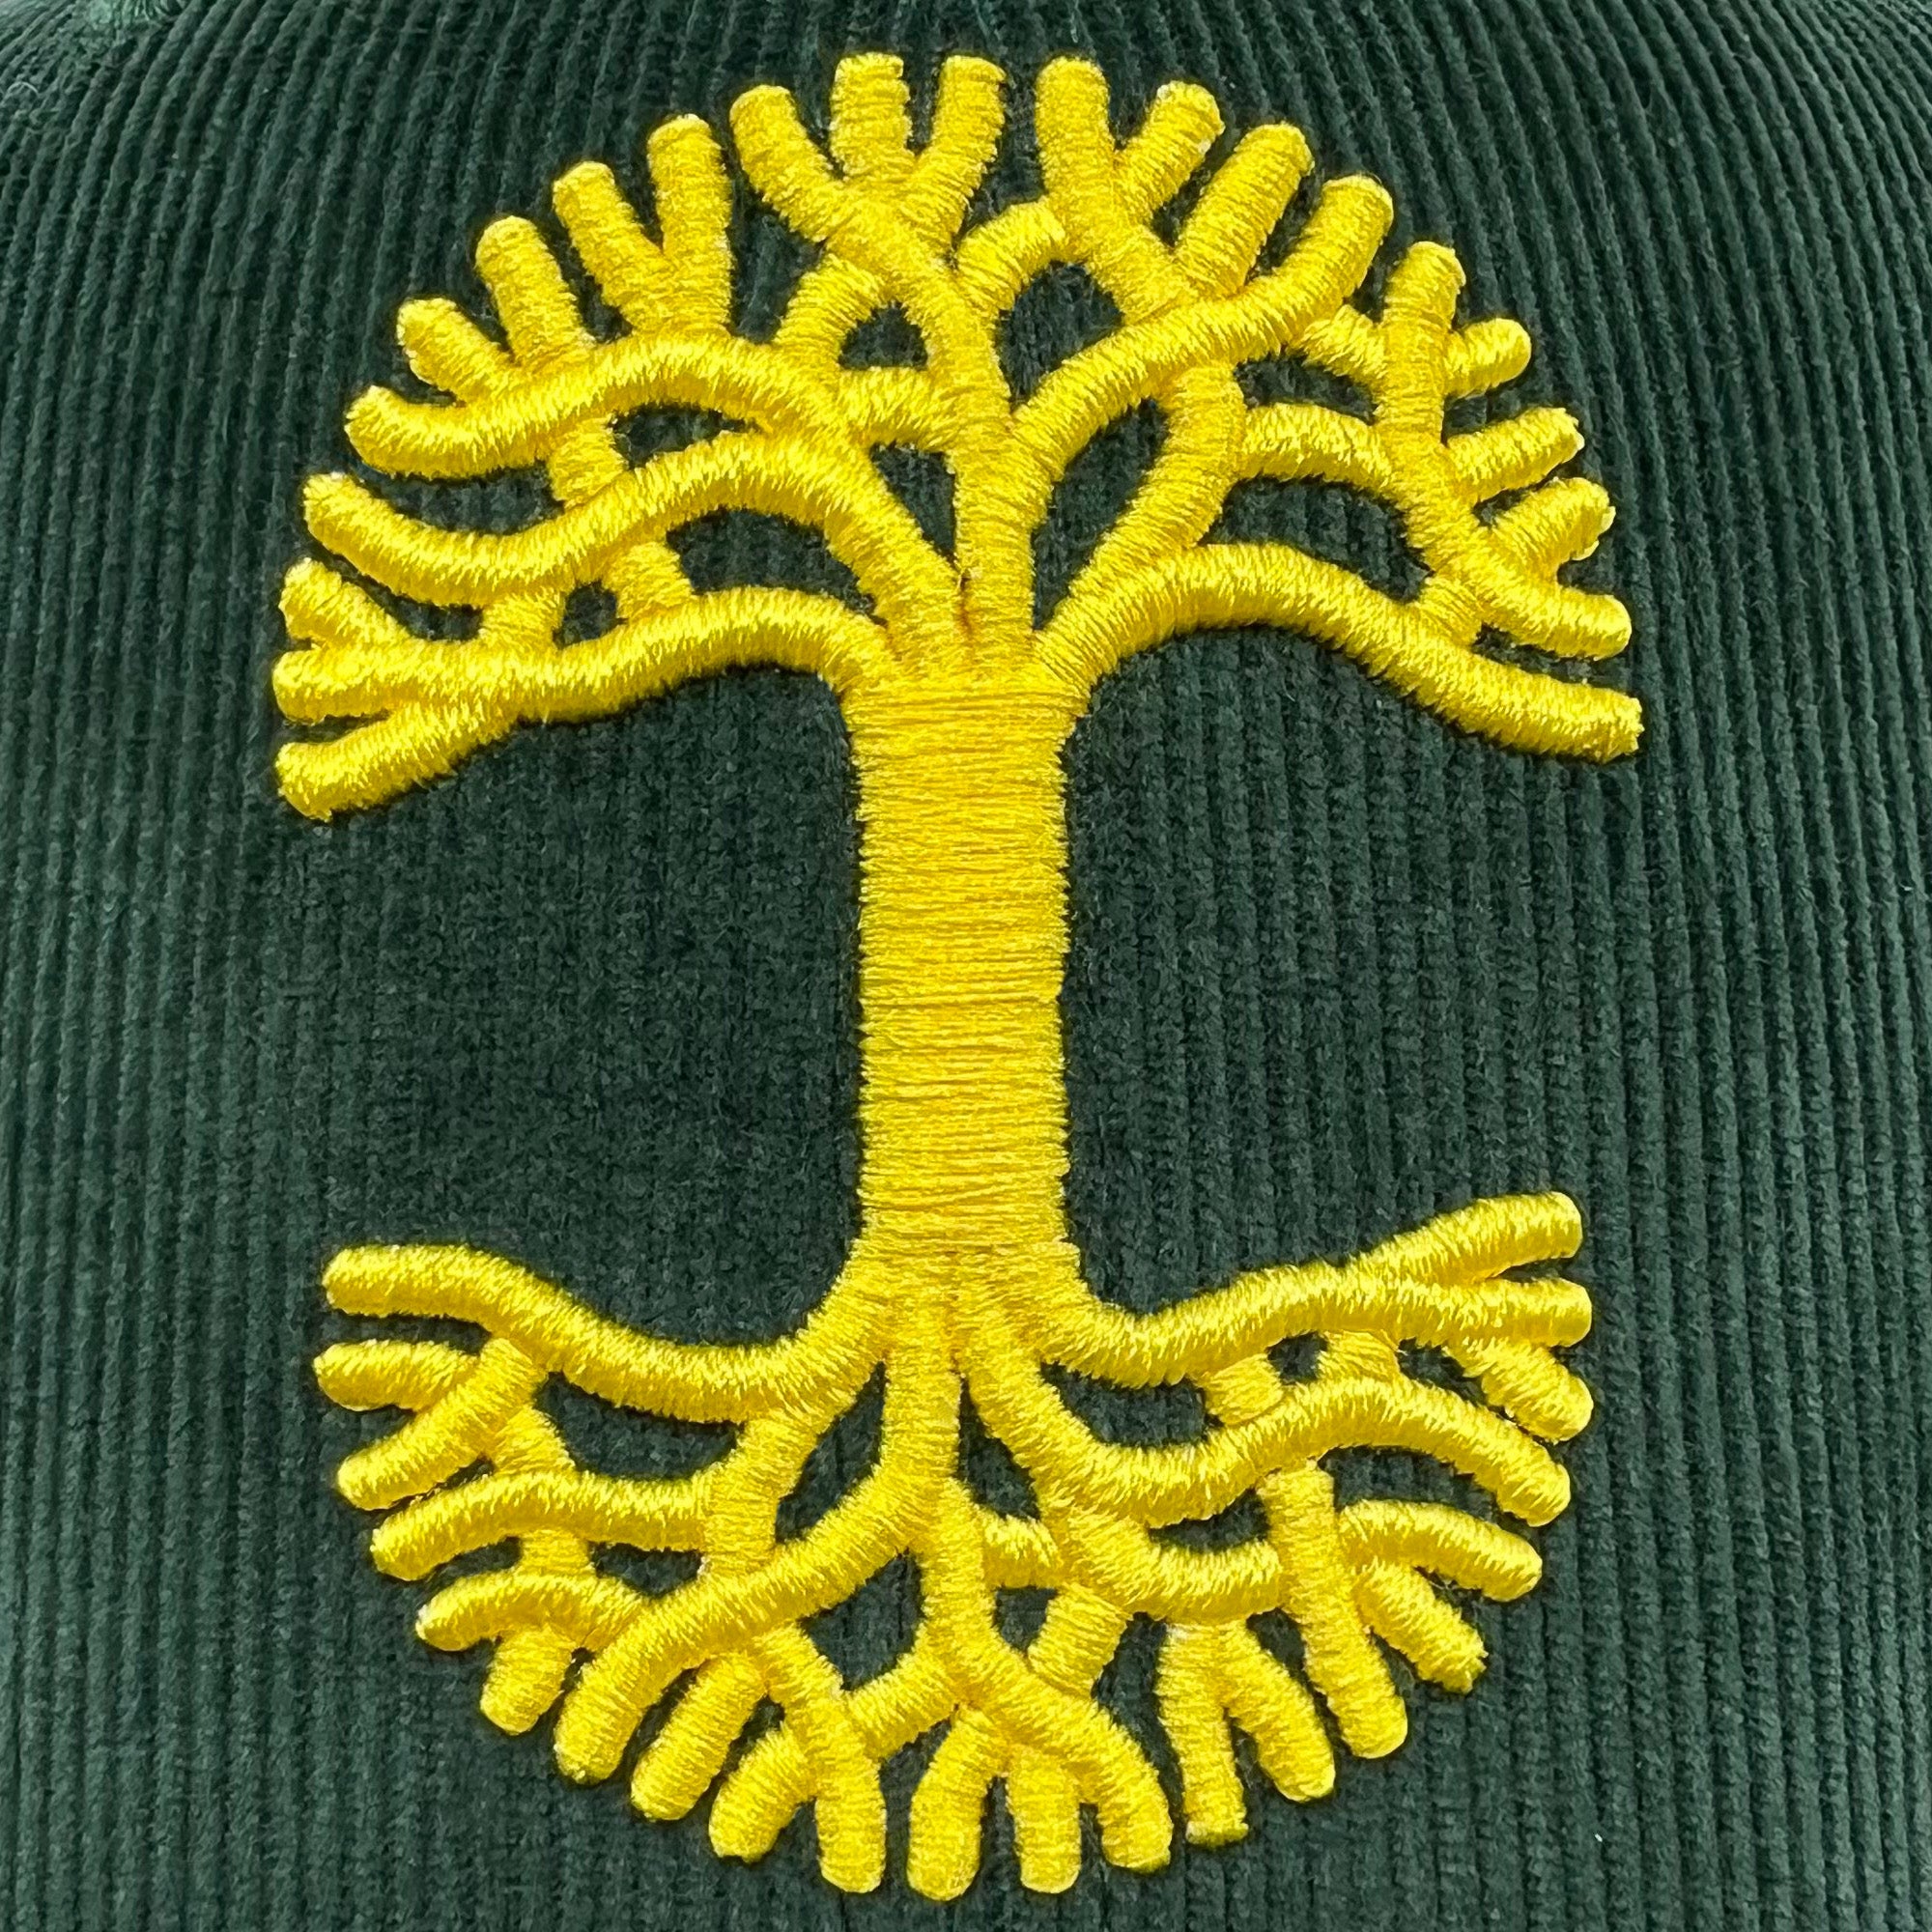 Detailed close-up of embroidered yellow Oaklandish tree logo on a forest green corduroy Mitchell & Ness cap.